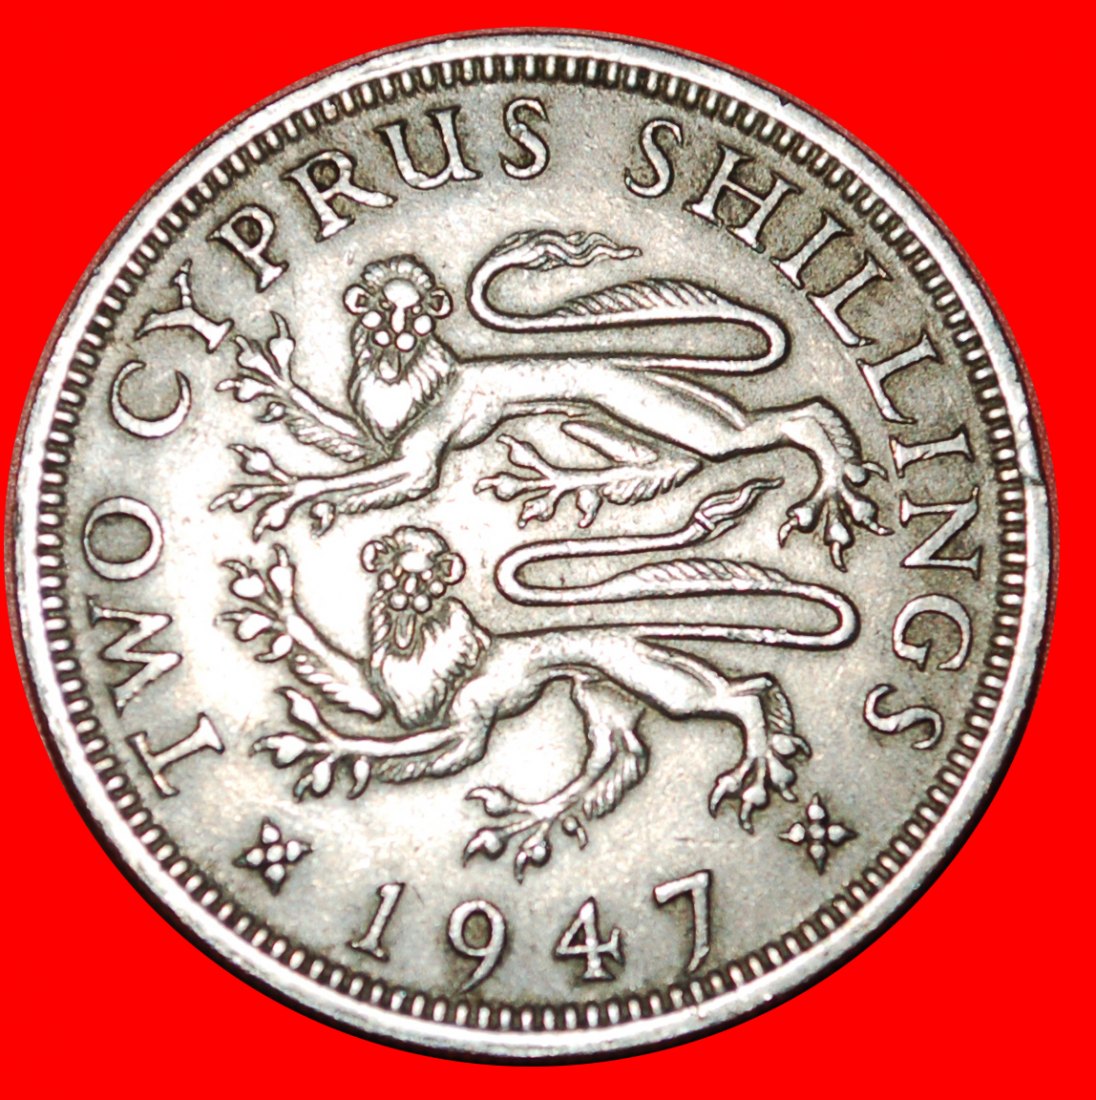  * GREAT BRITAIN (1947-1949): CYPRUS ★ 2 SHILLINGS 1947! UNCOMMON! LOW START ★ NO RESERVE!   